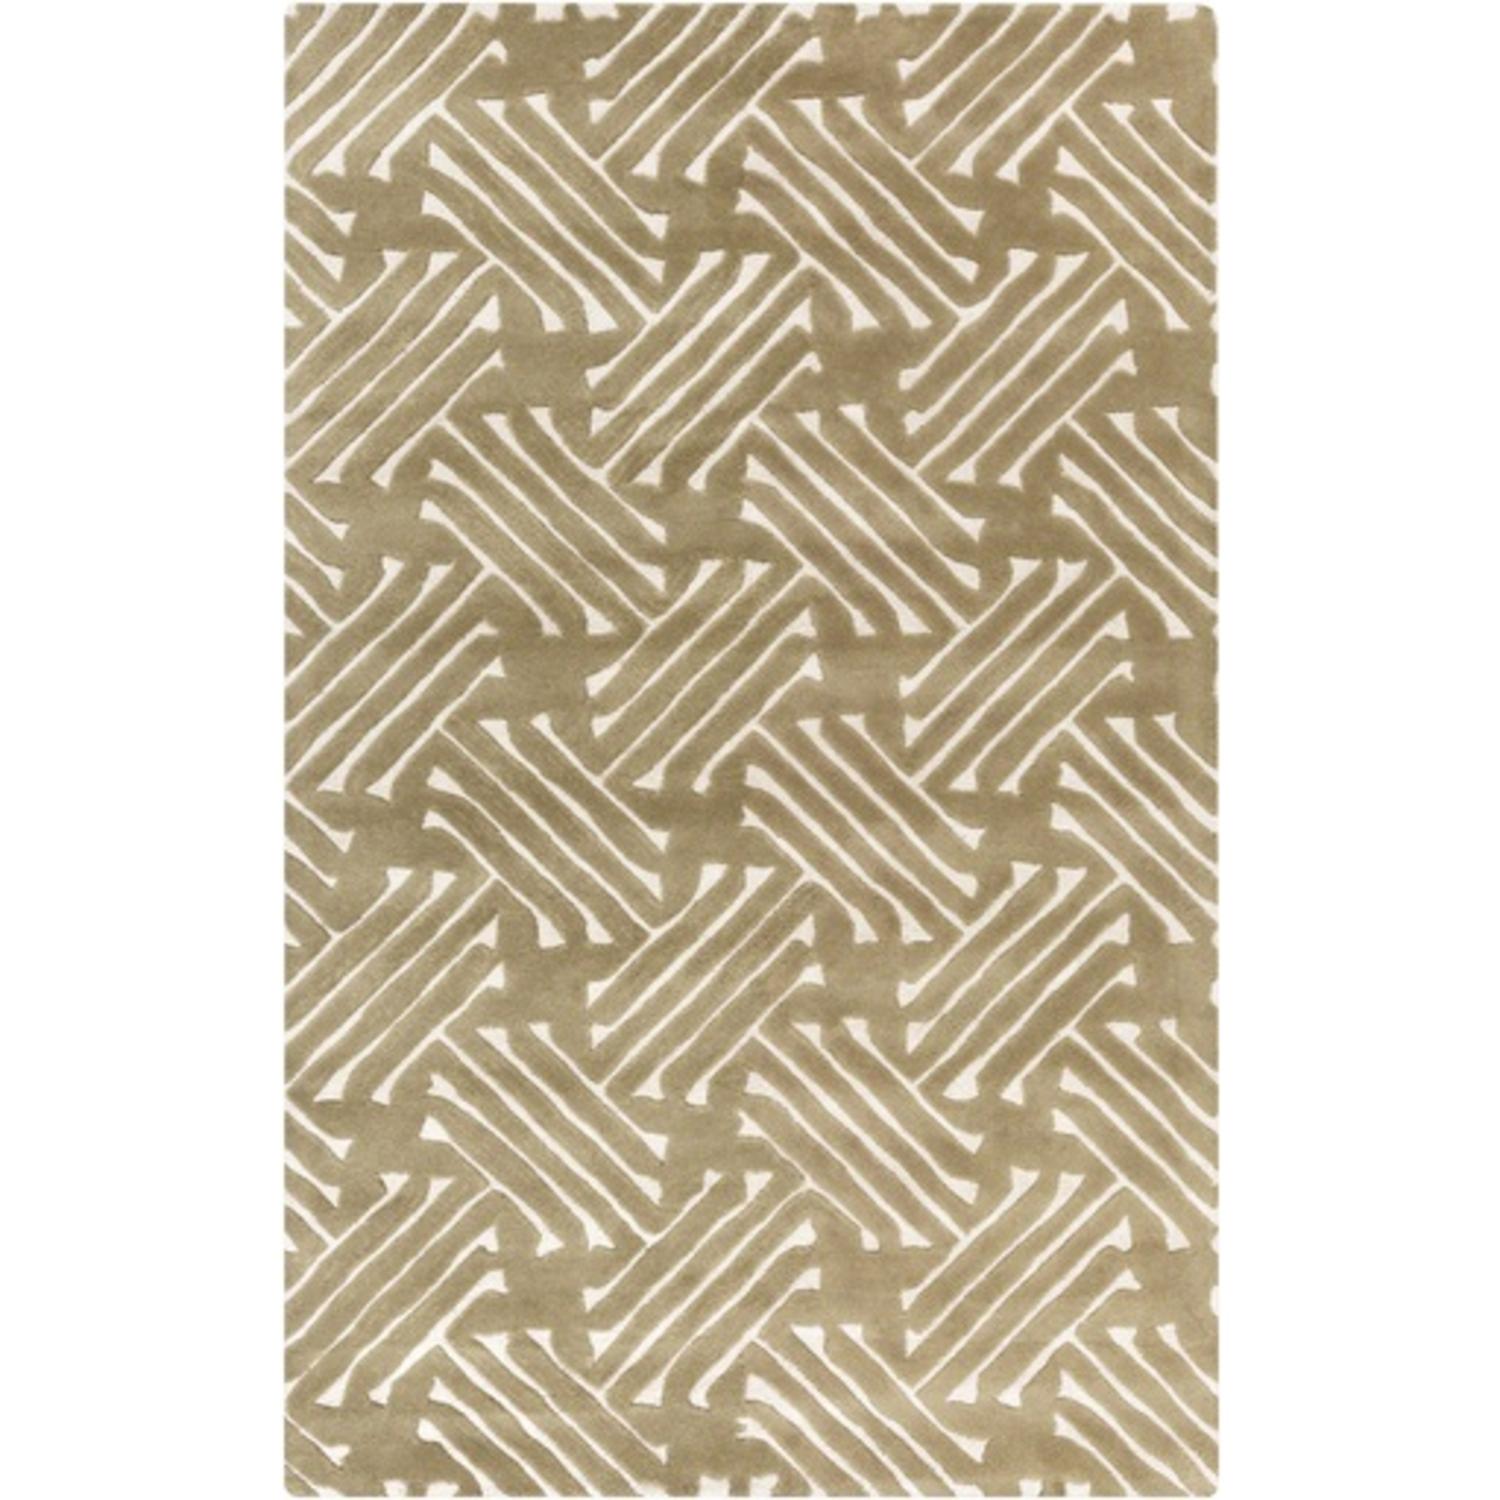 Diva At Home 8' x 11' Labyrinth Luster Olive Green and Pearl Beige Wool Hand Tufted Area Throw Rug